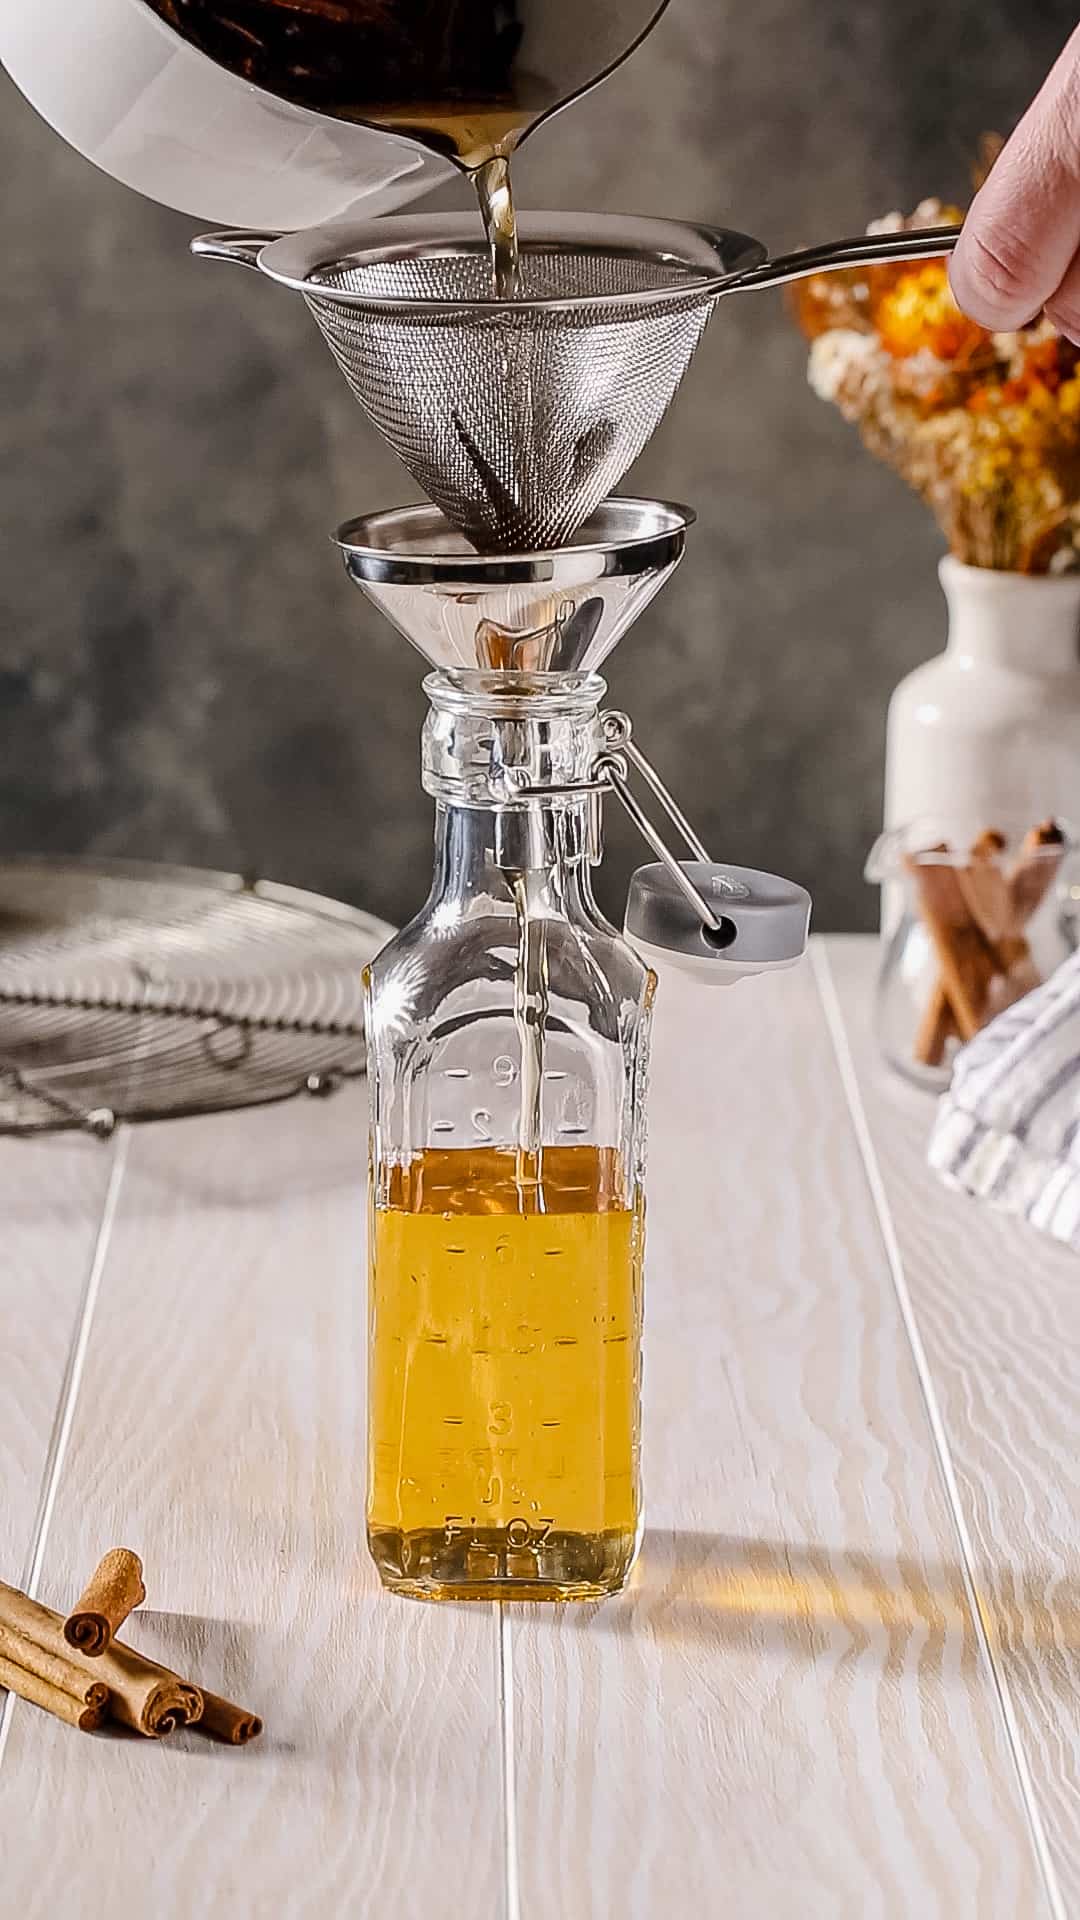 Side view of a glass bottle with syrup being poured into it through a strainer and funnel.